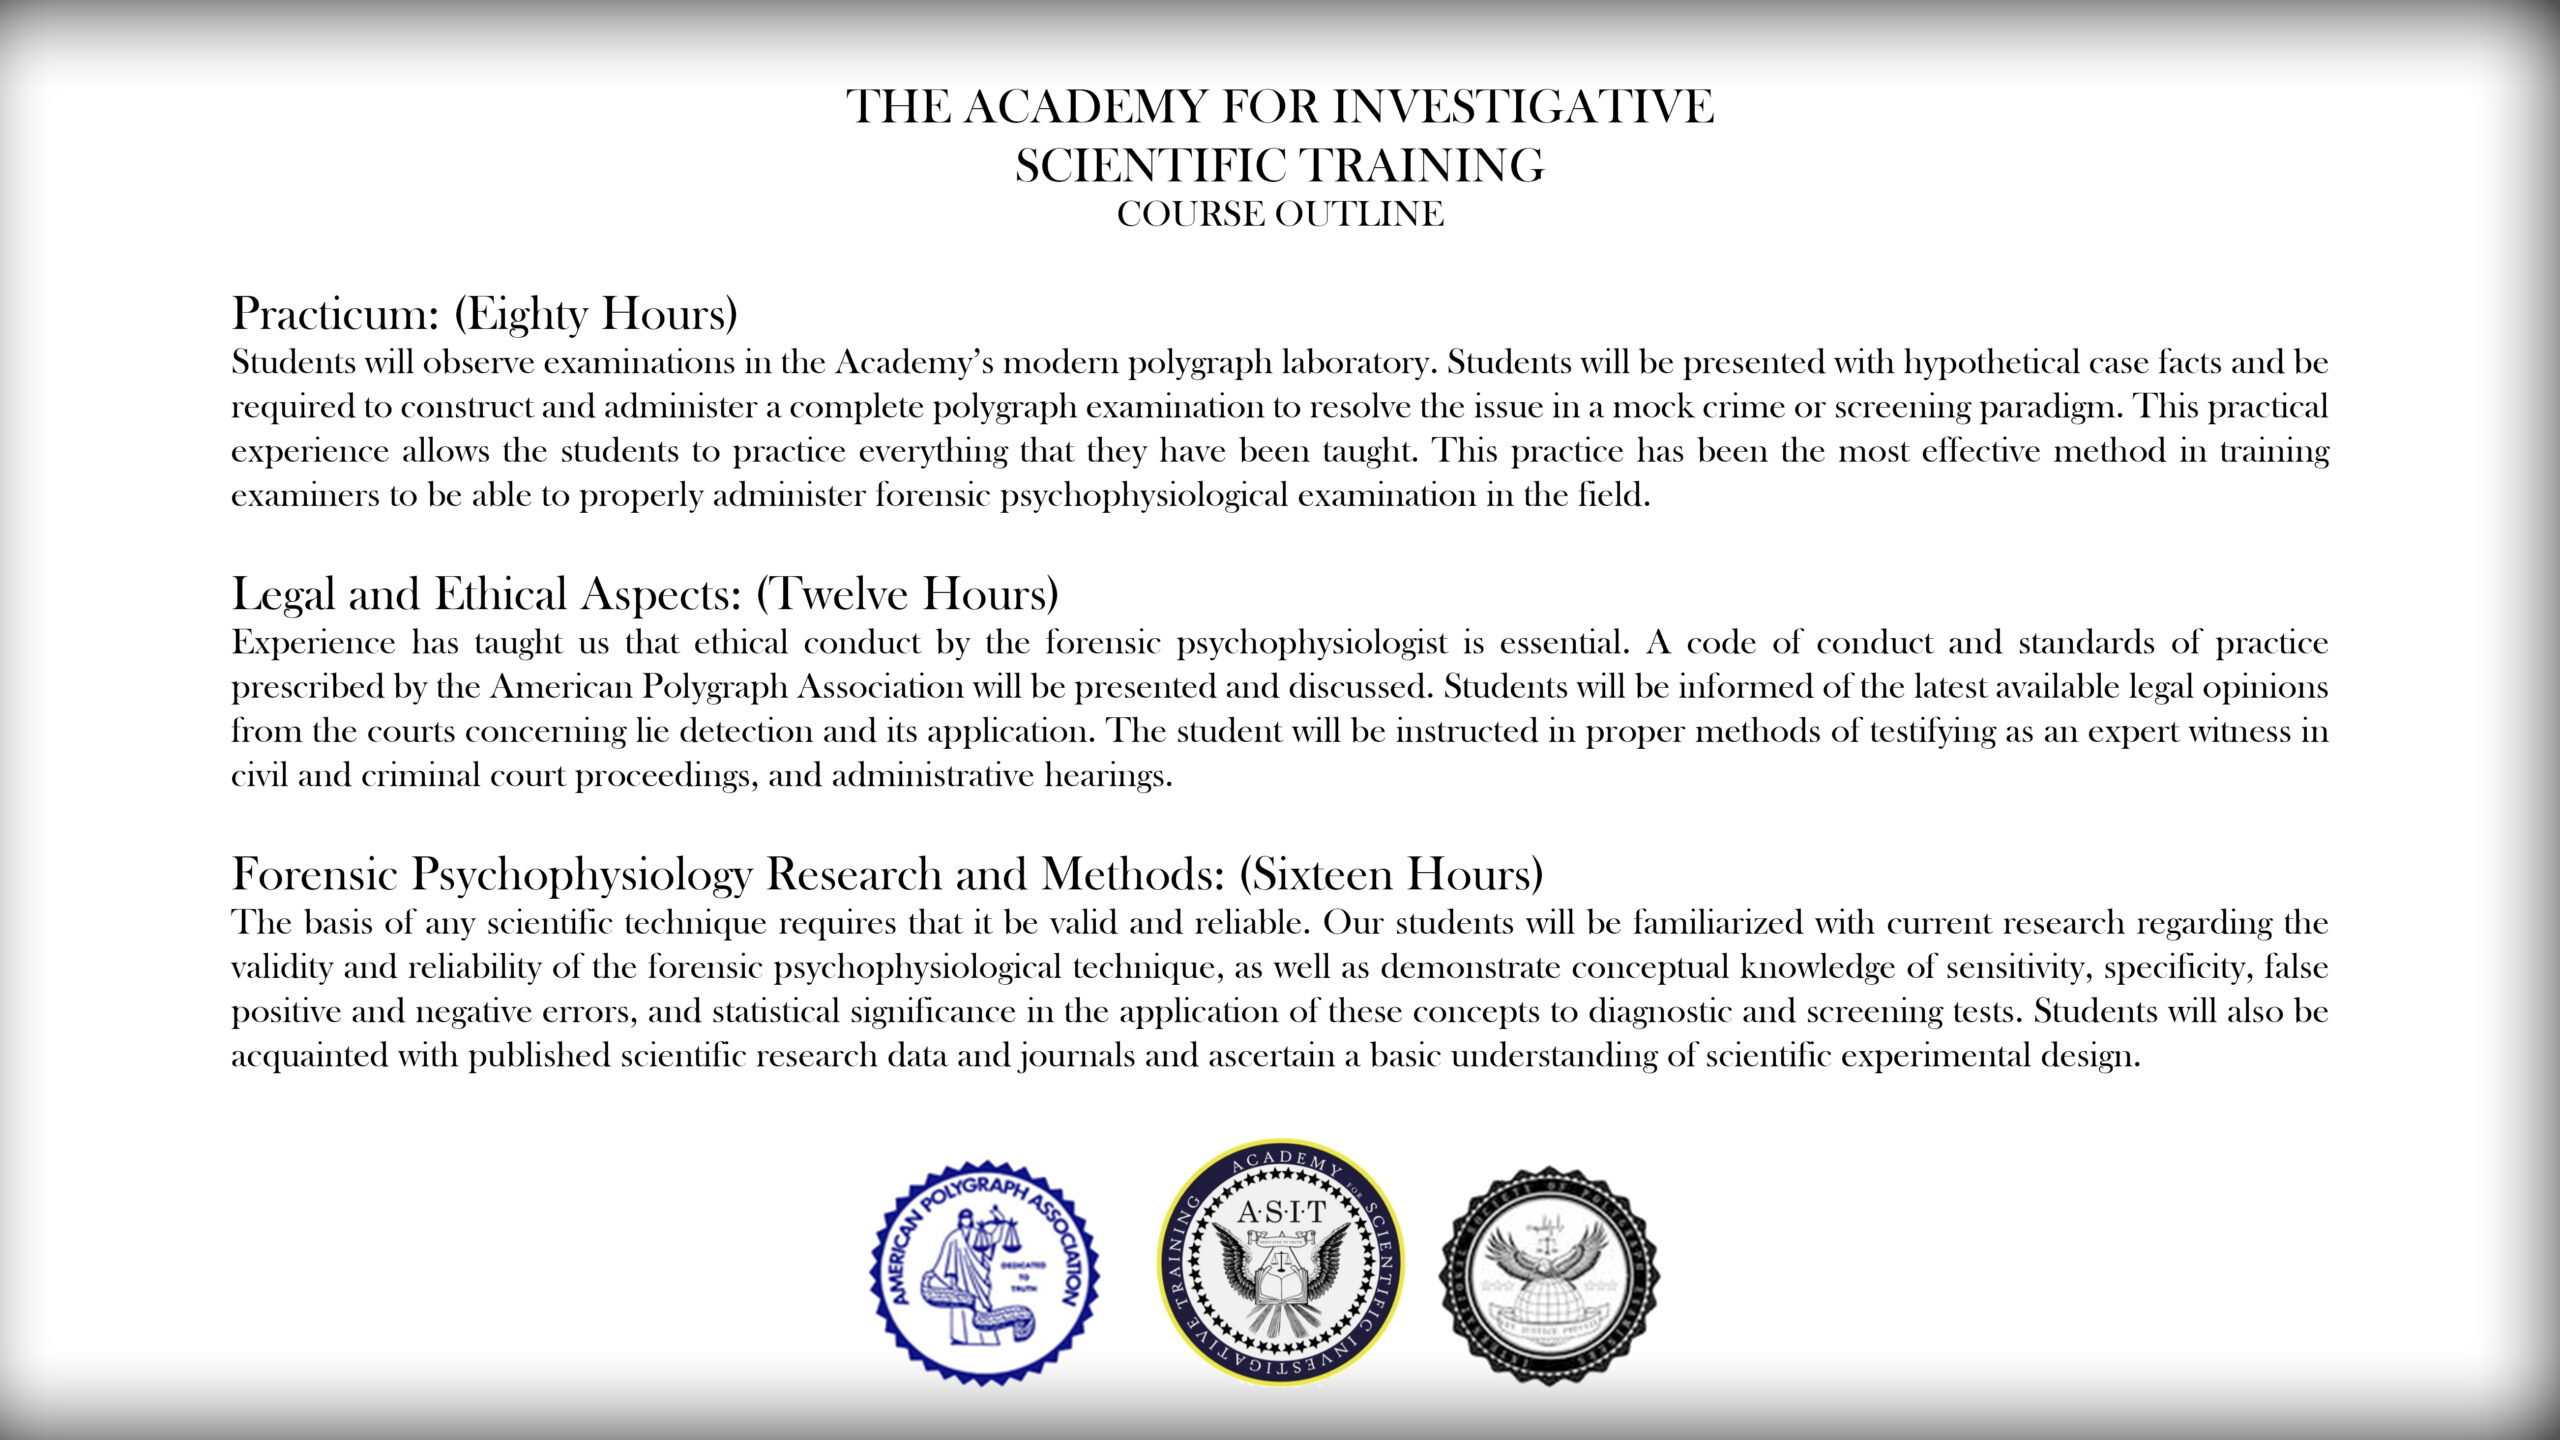 The Academy for Investigative Scientific Training Basic Polygraph Examiner Course Outline Part 4